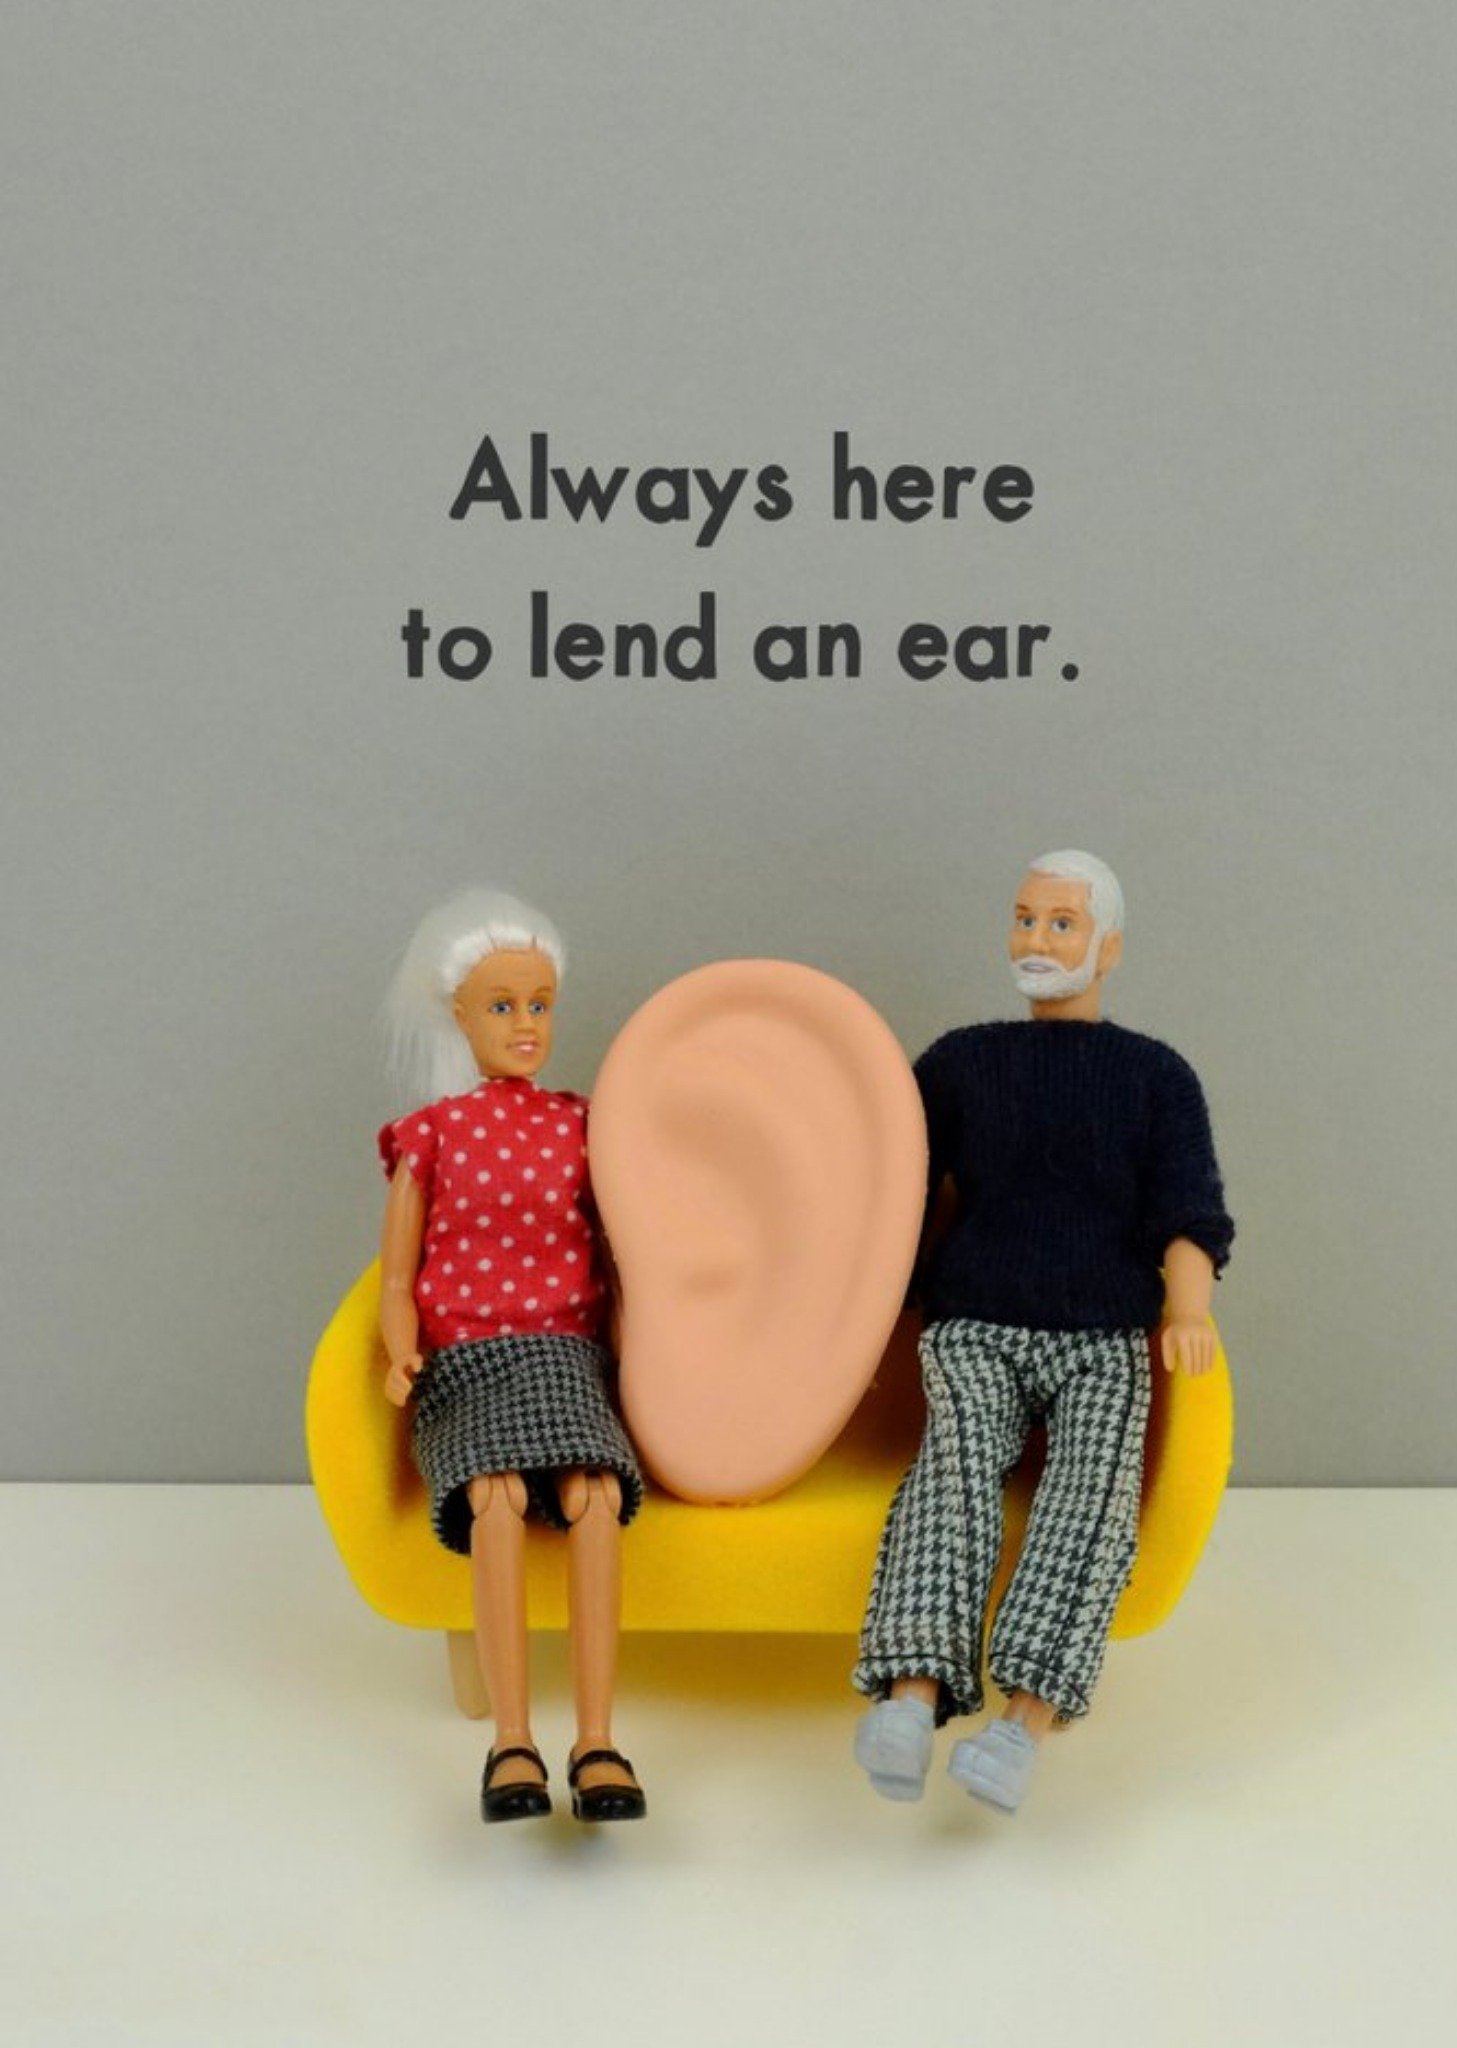 Bold And Bright Funny Photographic Image Of Two Dolls Sat With A Large Ear Always Here To Lend An Ea